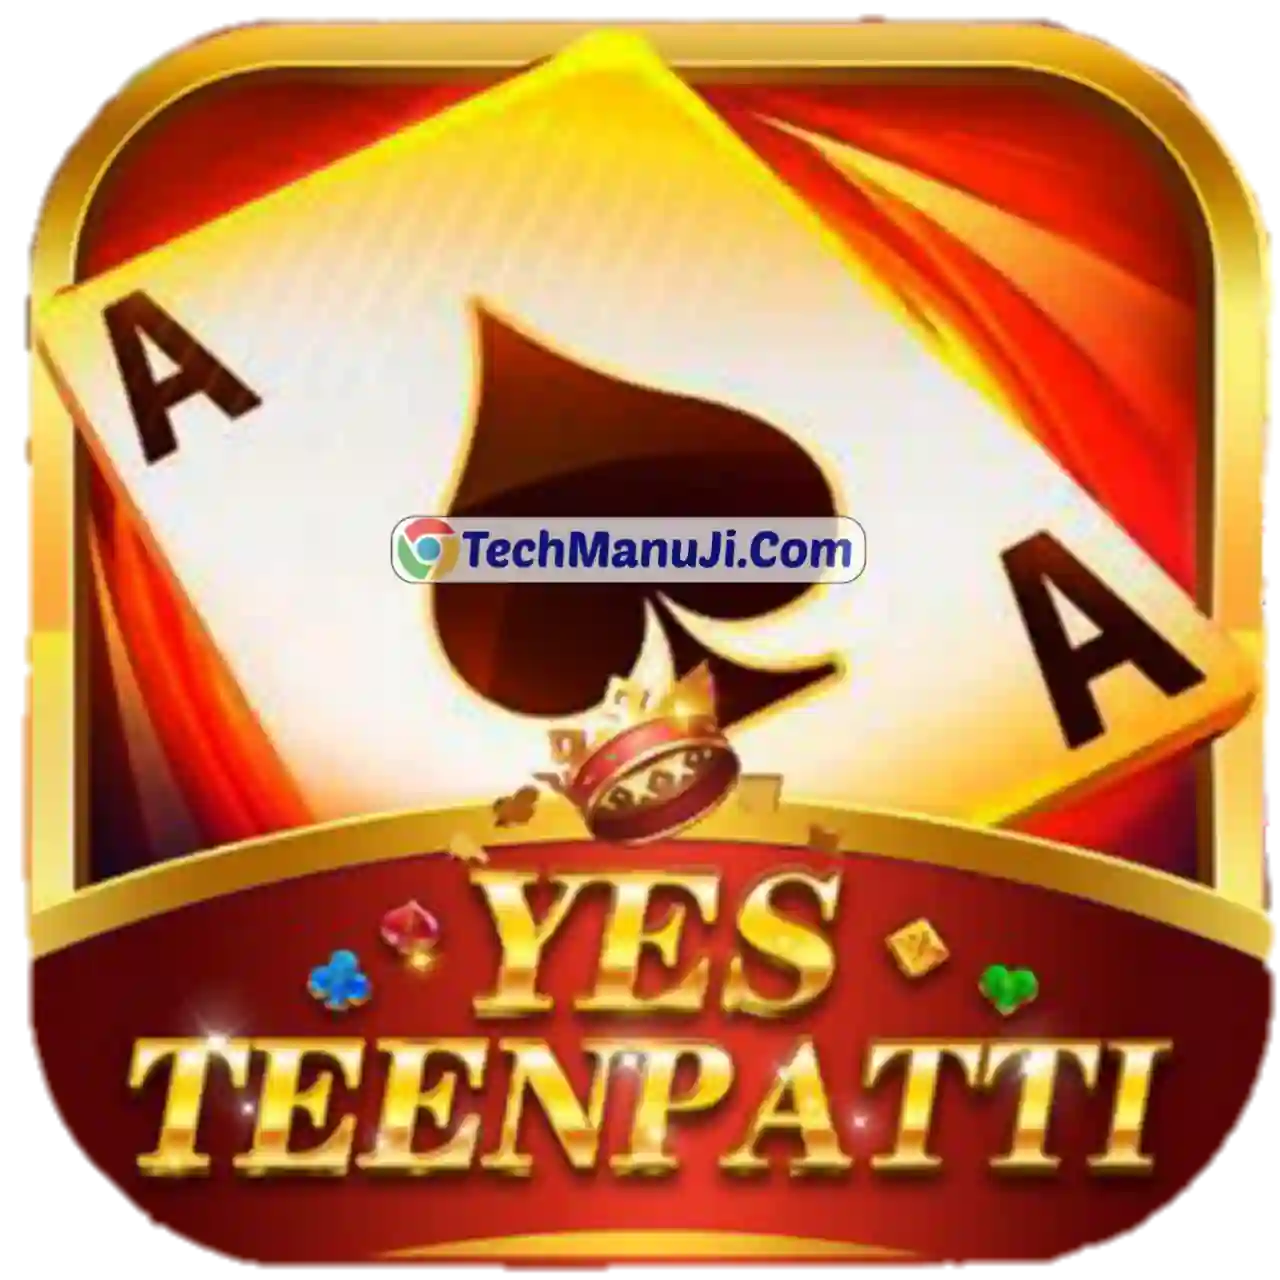 Teen Patti Yes Apk Download All 7 Up Down Earning App List